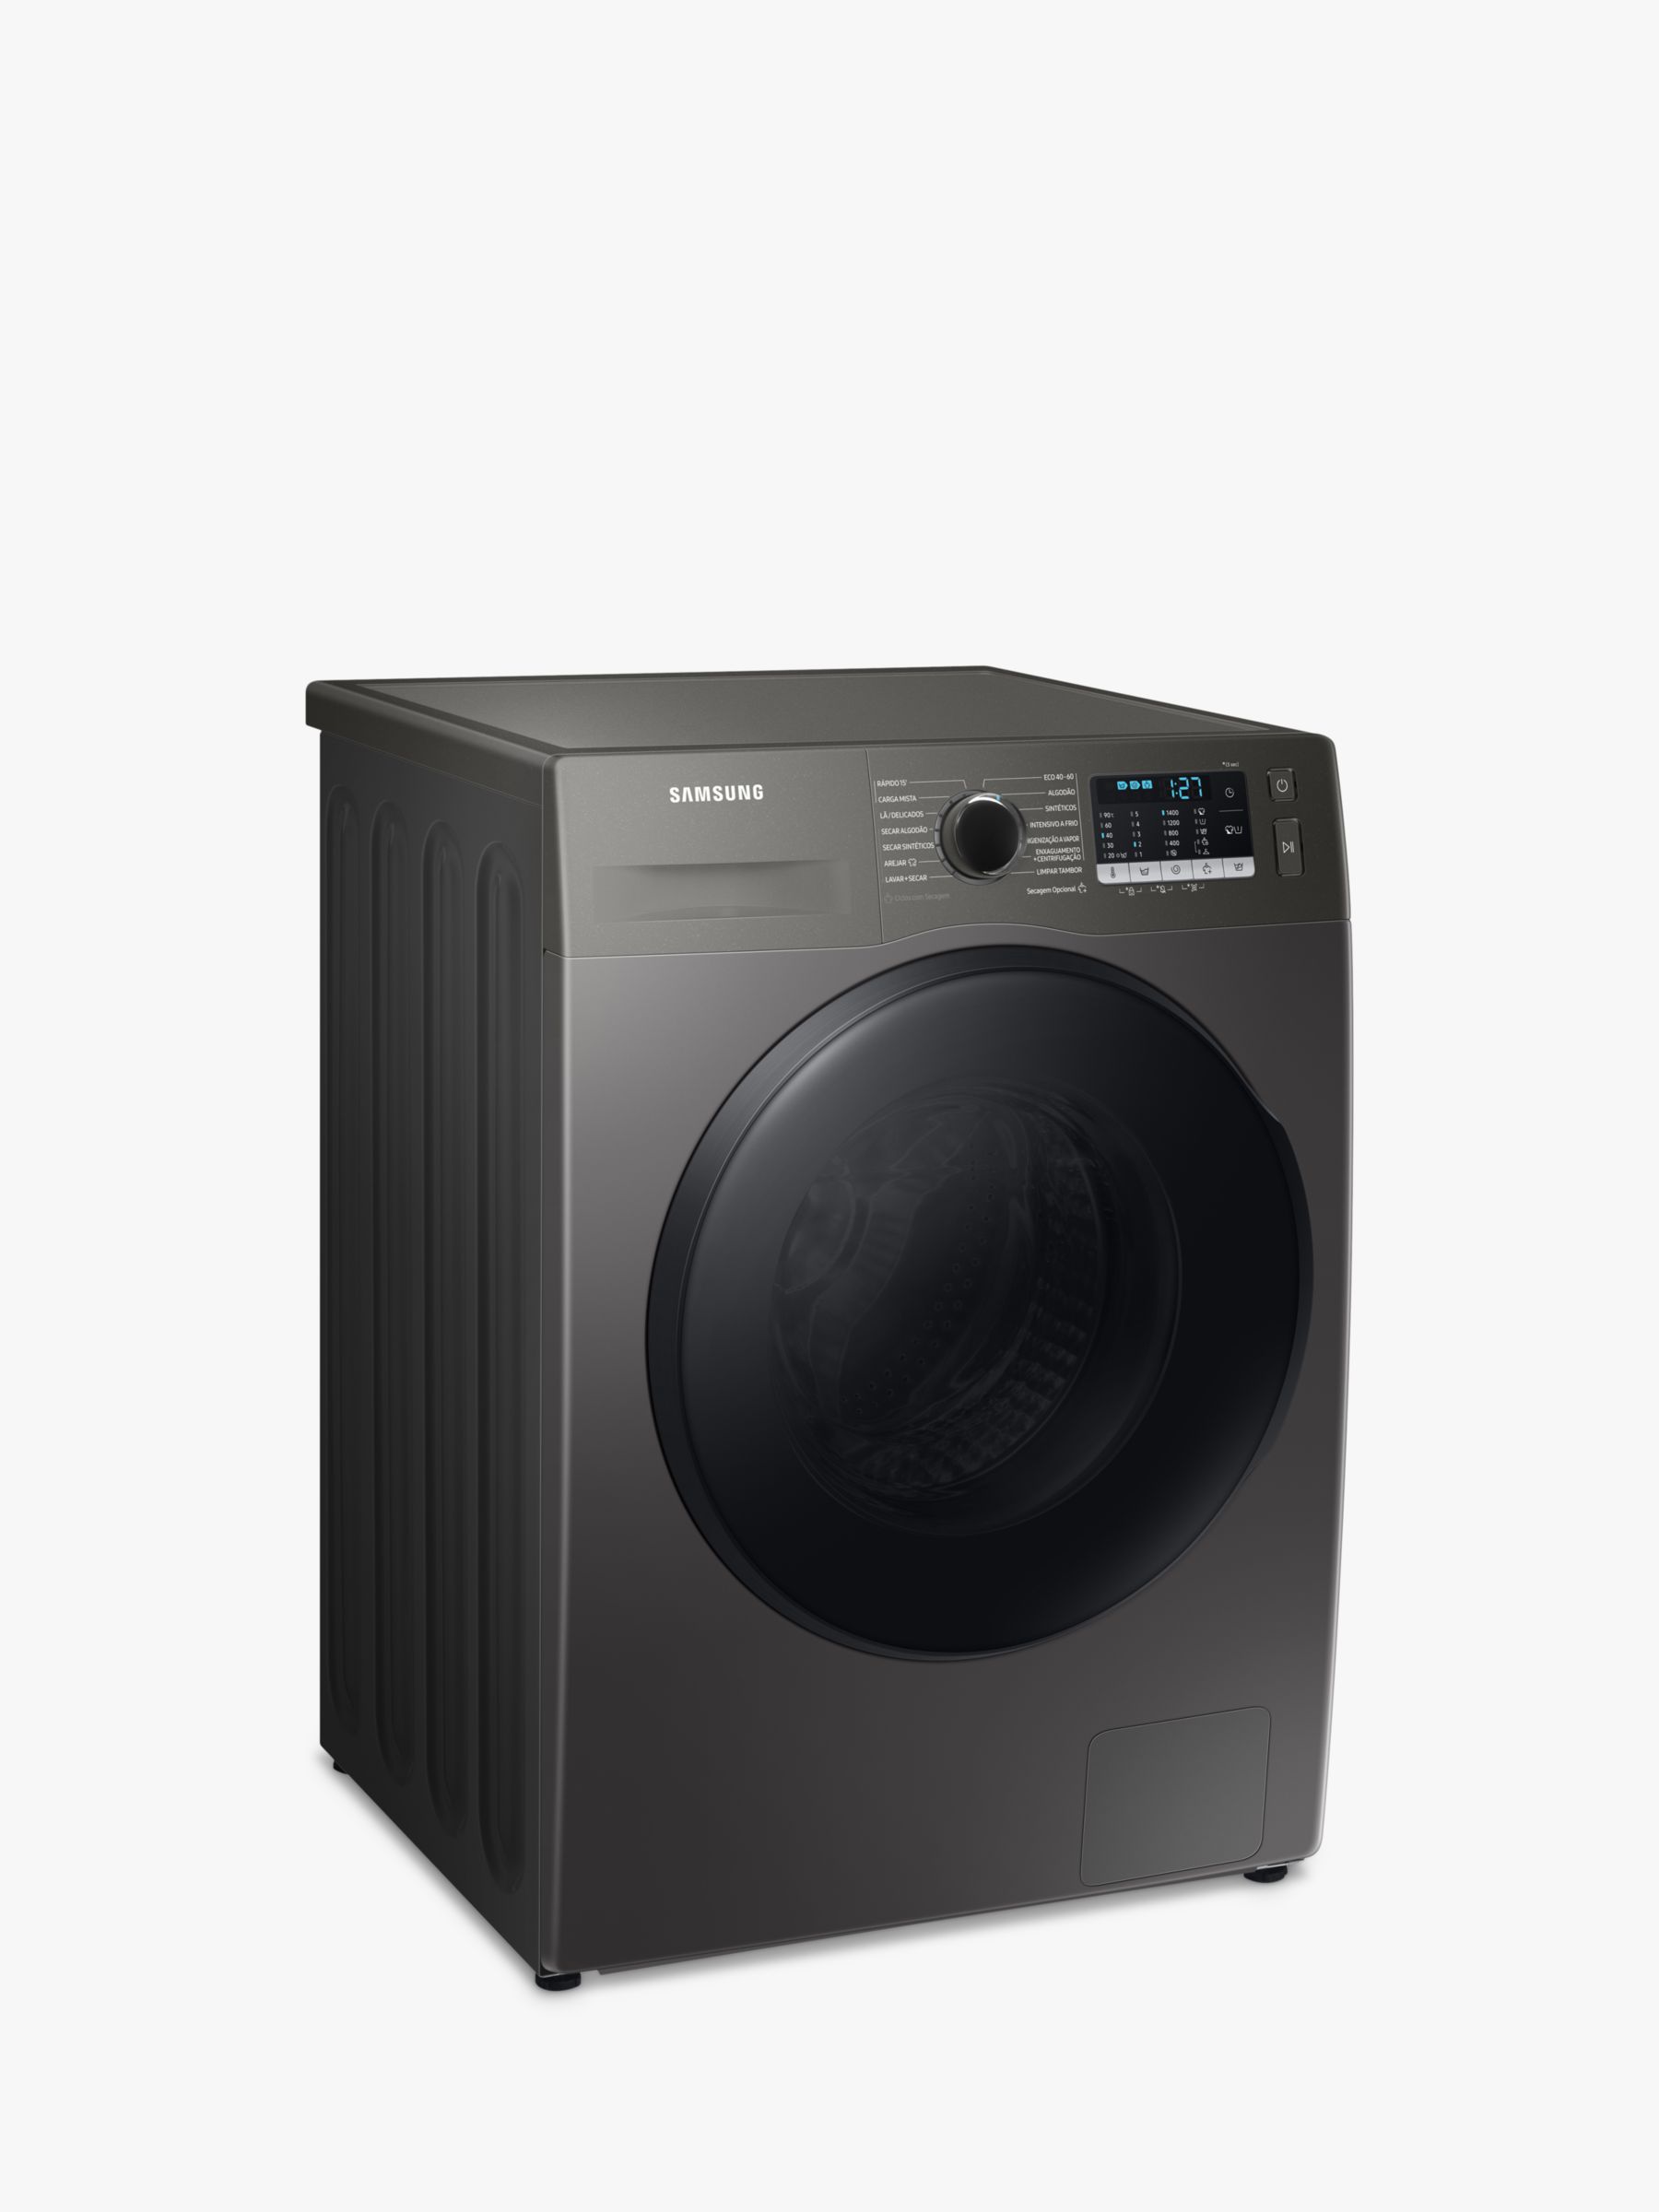 Samsung Series 5 Wd90ta046bx Freestanding Ecobubble Washer Dryer 9kg 6kg Load 1400rpm Spin Graphite